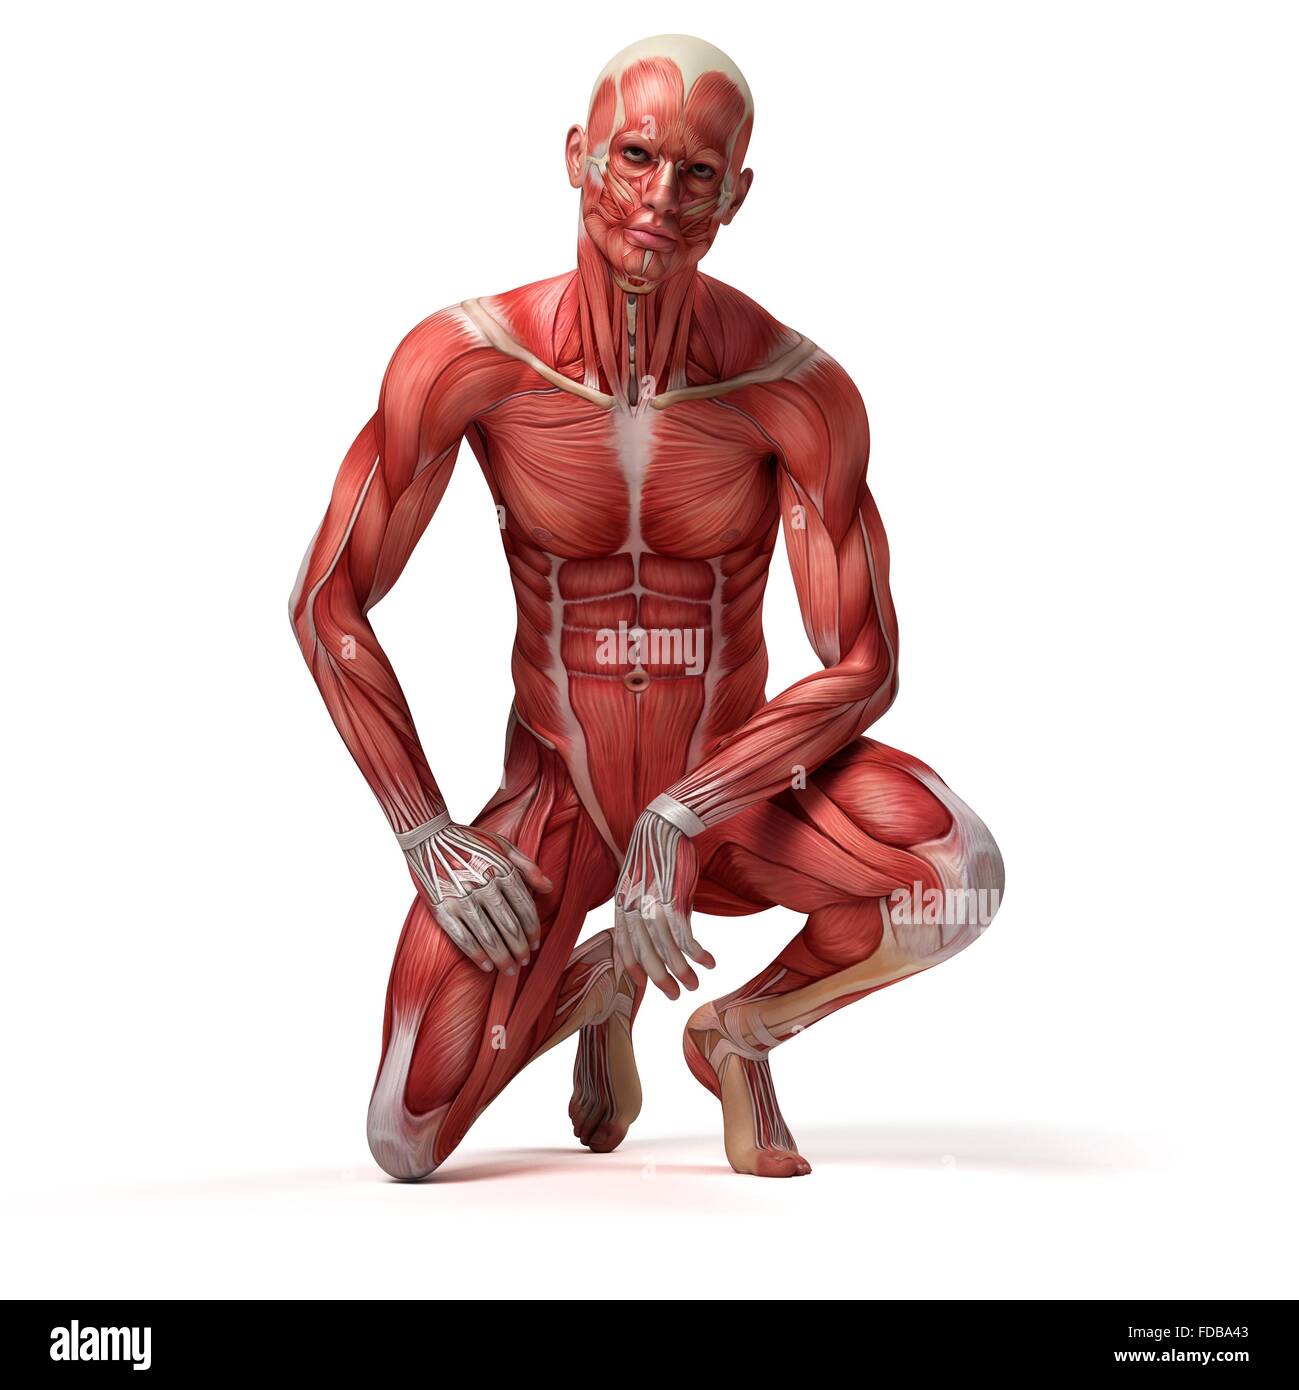 Muscular system of a man crouching, illustration. Stock Photo